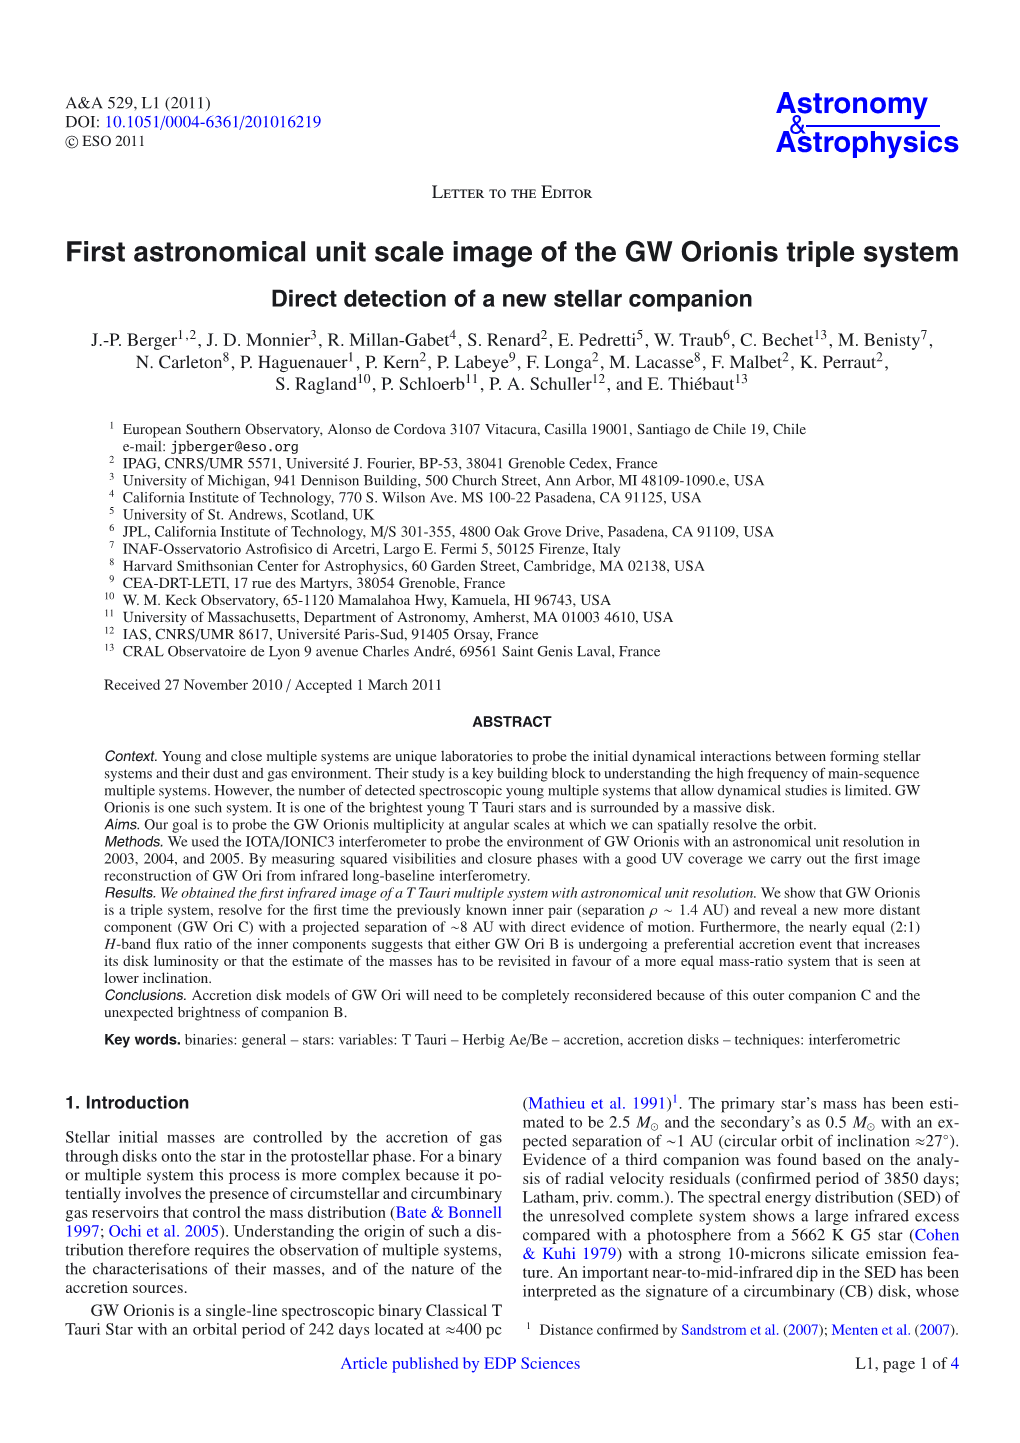 First Astronomical Unit Scale Image of the GW Orionis Triple System Direct Detection of a New Stellar Companion